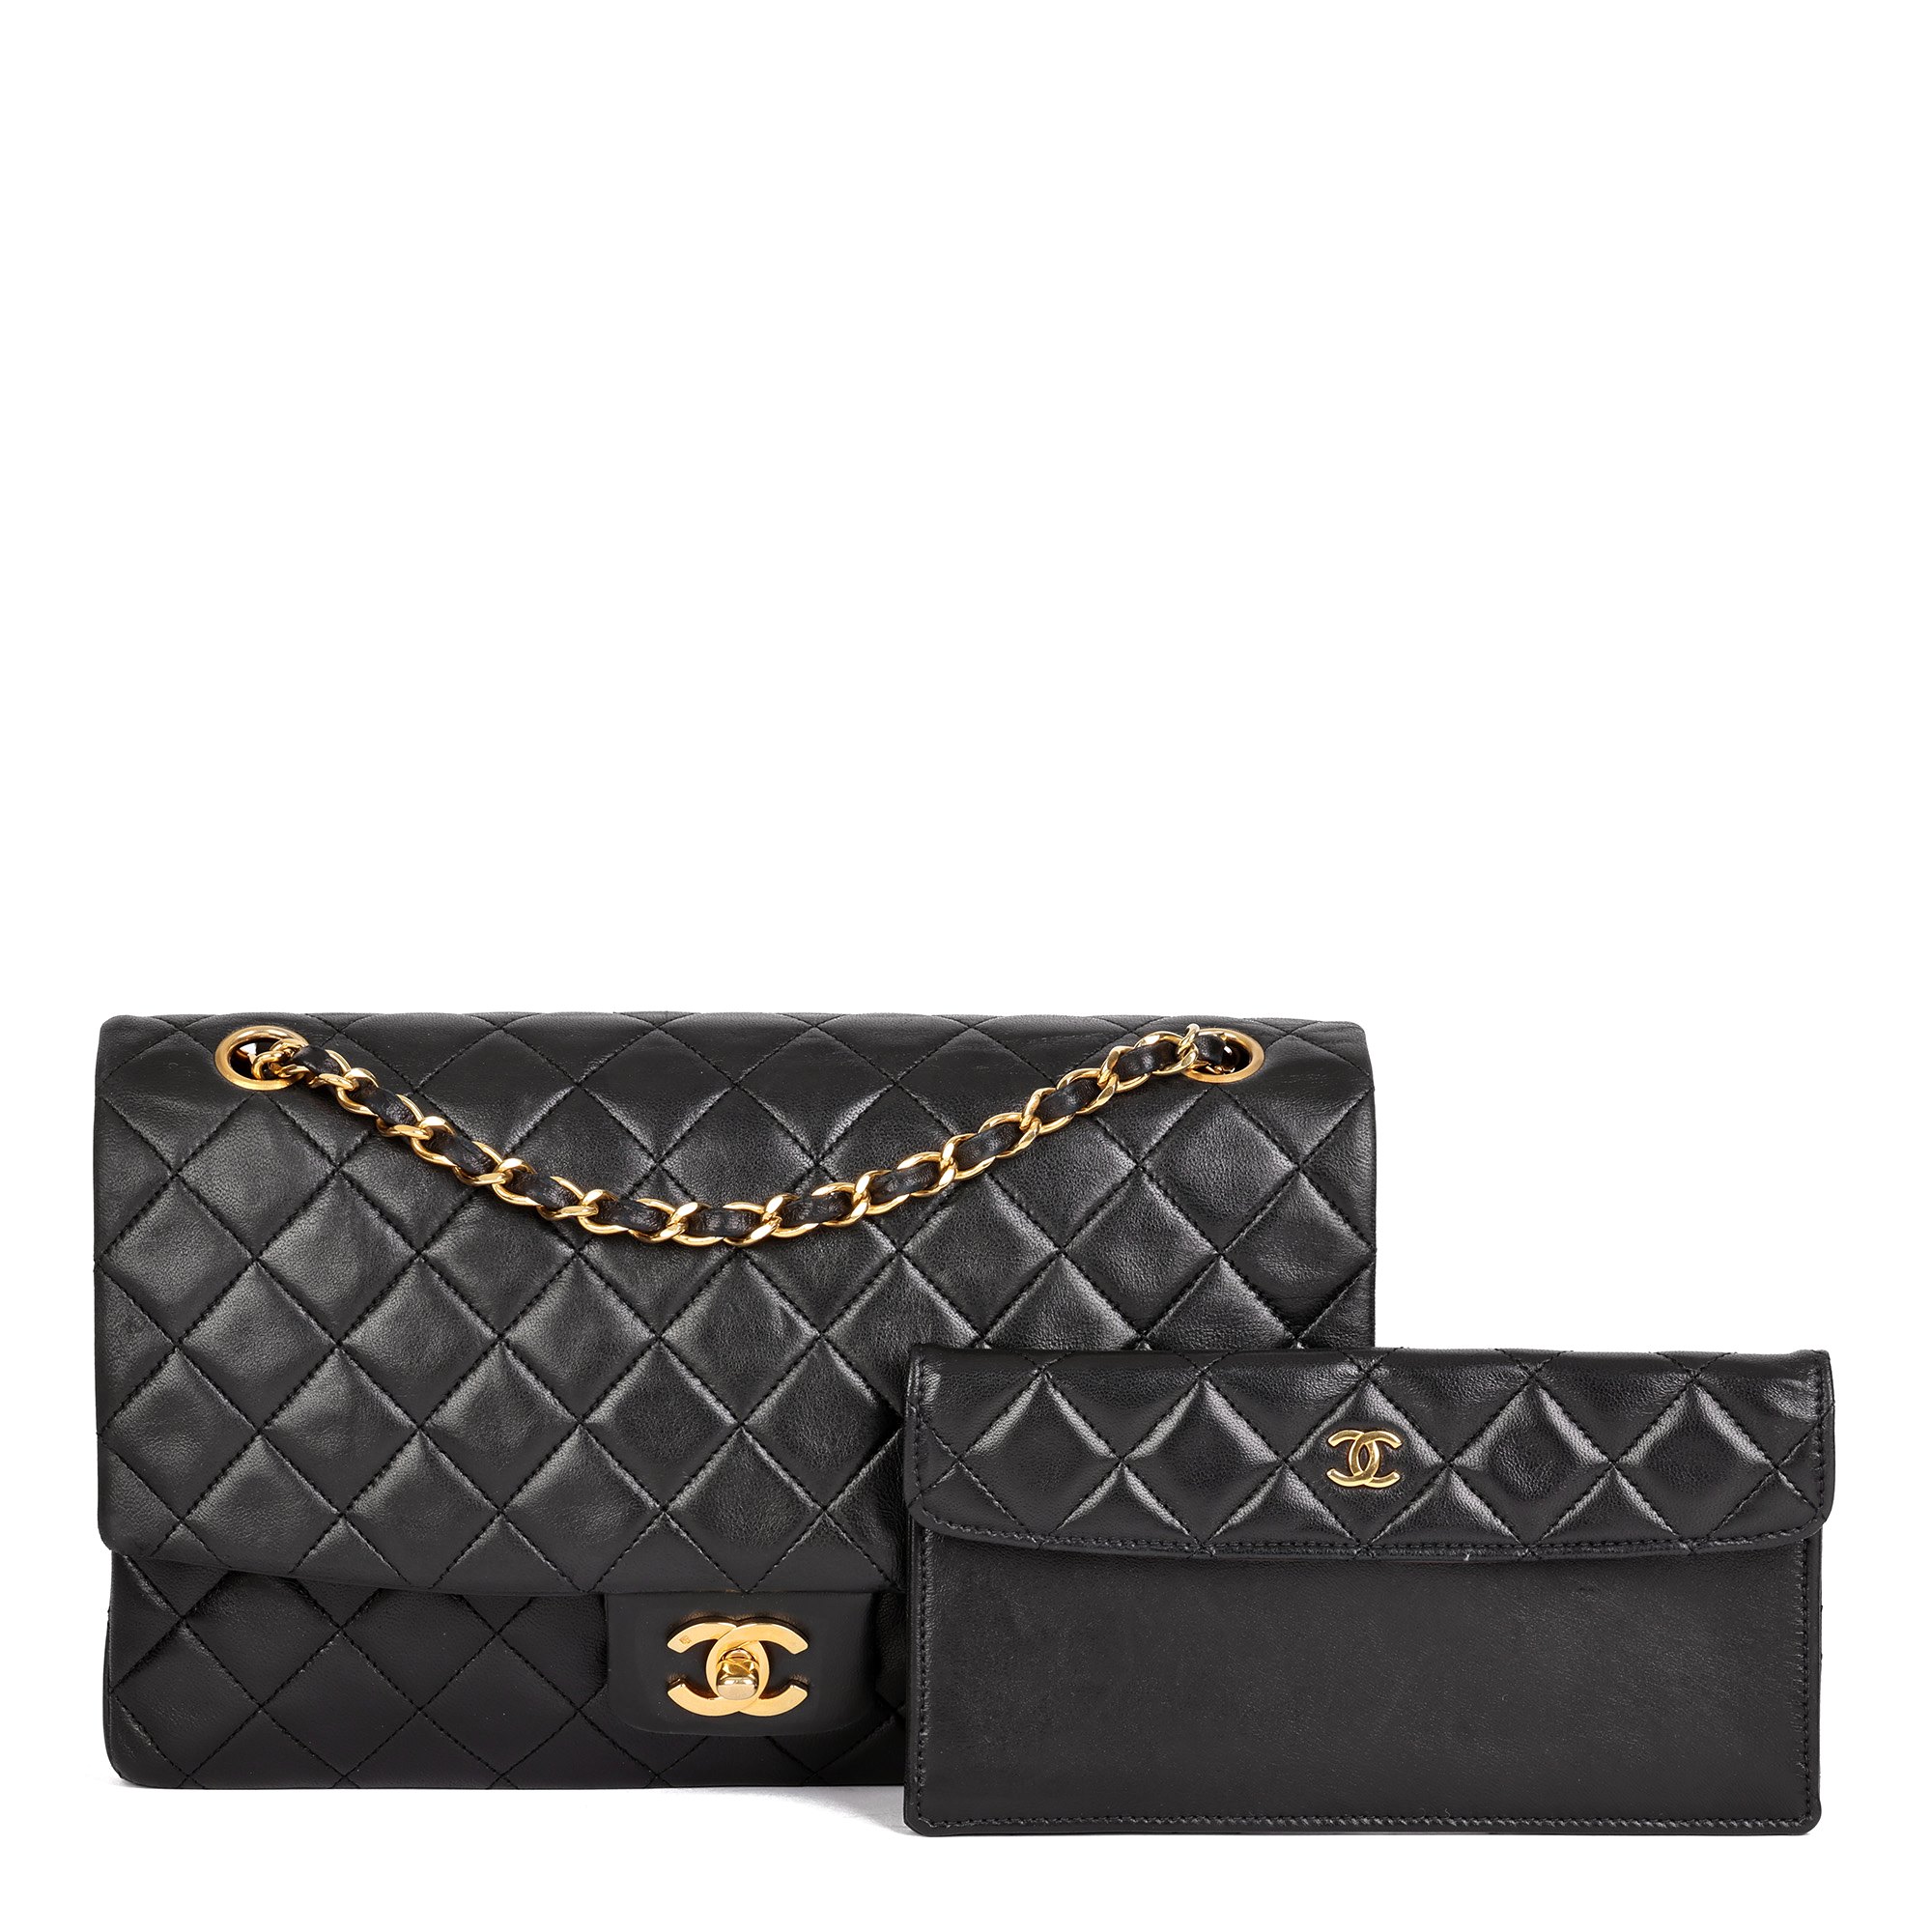 CHANEL  Bags  A Simple Guide To Authenticate Chanel Bag Codes  Poshmark